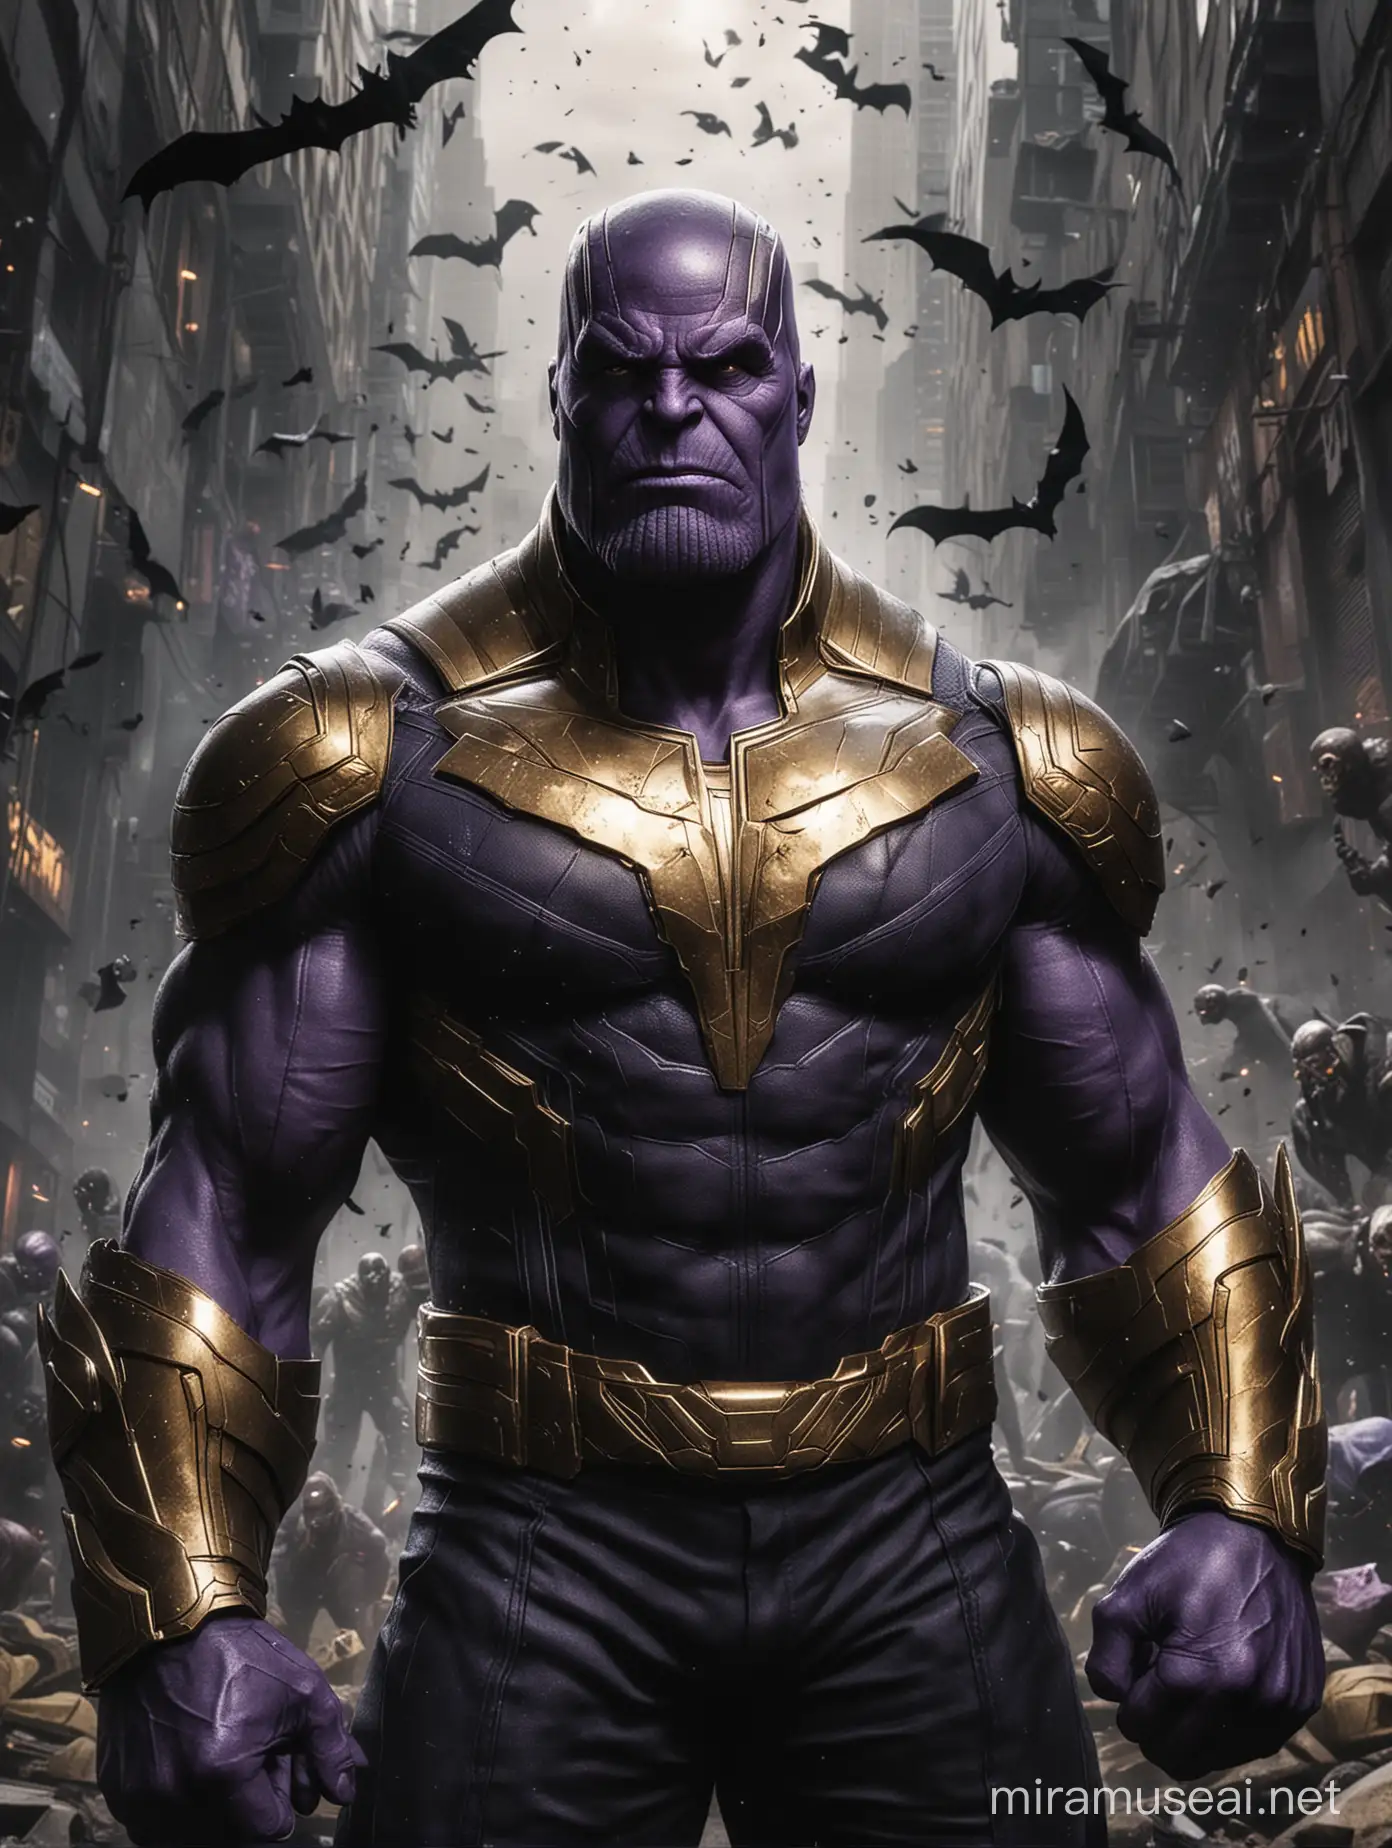 Title: "Thanos: The Dark Avenger"

In a parallel universe, where the lines between heroes and villains blur, Thanos emerges as a vigilante known as the Dark Avenger, taking on the mantle of Batman. With his ruthless efficiency and unwavering dedication to restoring balance, he strikes fear into the hearts of criminals.

But unlike the traditional Batman, Thanos doesn't shy away from using extreme measures to achieve his goals. His quest for justice is tempered with his belief in the necessity of culling the population to prevent overconsumption and restore harmony to the universe.

Armed with the Infinity Gauntlet, modified to suit his vigilante pursuits, Thanos wages a one-man war on crime, bringing swift and decisive judgment to those who dare to disrupt the delicate balance he seeks to maintain.

Yet, even as he delivers justice with an iron fist, whispers of fear and awe spread throughout the criminal underworld, as they realize that in this dark avenger, they face not only a formidable opponent but also a force of nature driven by an unfathomable purpose.

In the shadows of Gotham City, Thanos as Batman stands as a grim reminder that sometimes, to achieve true balance, one must embrace the darkness within.